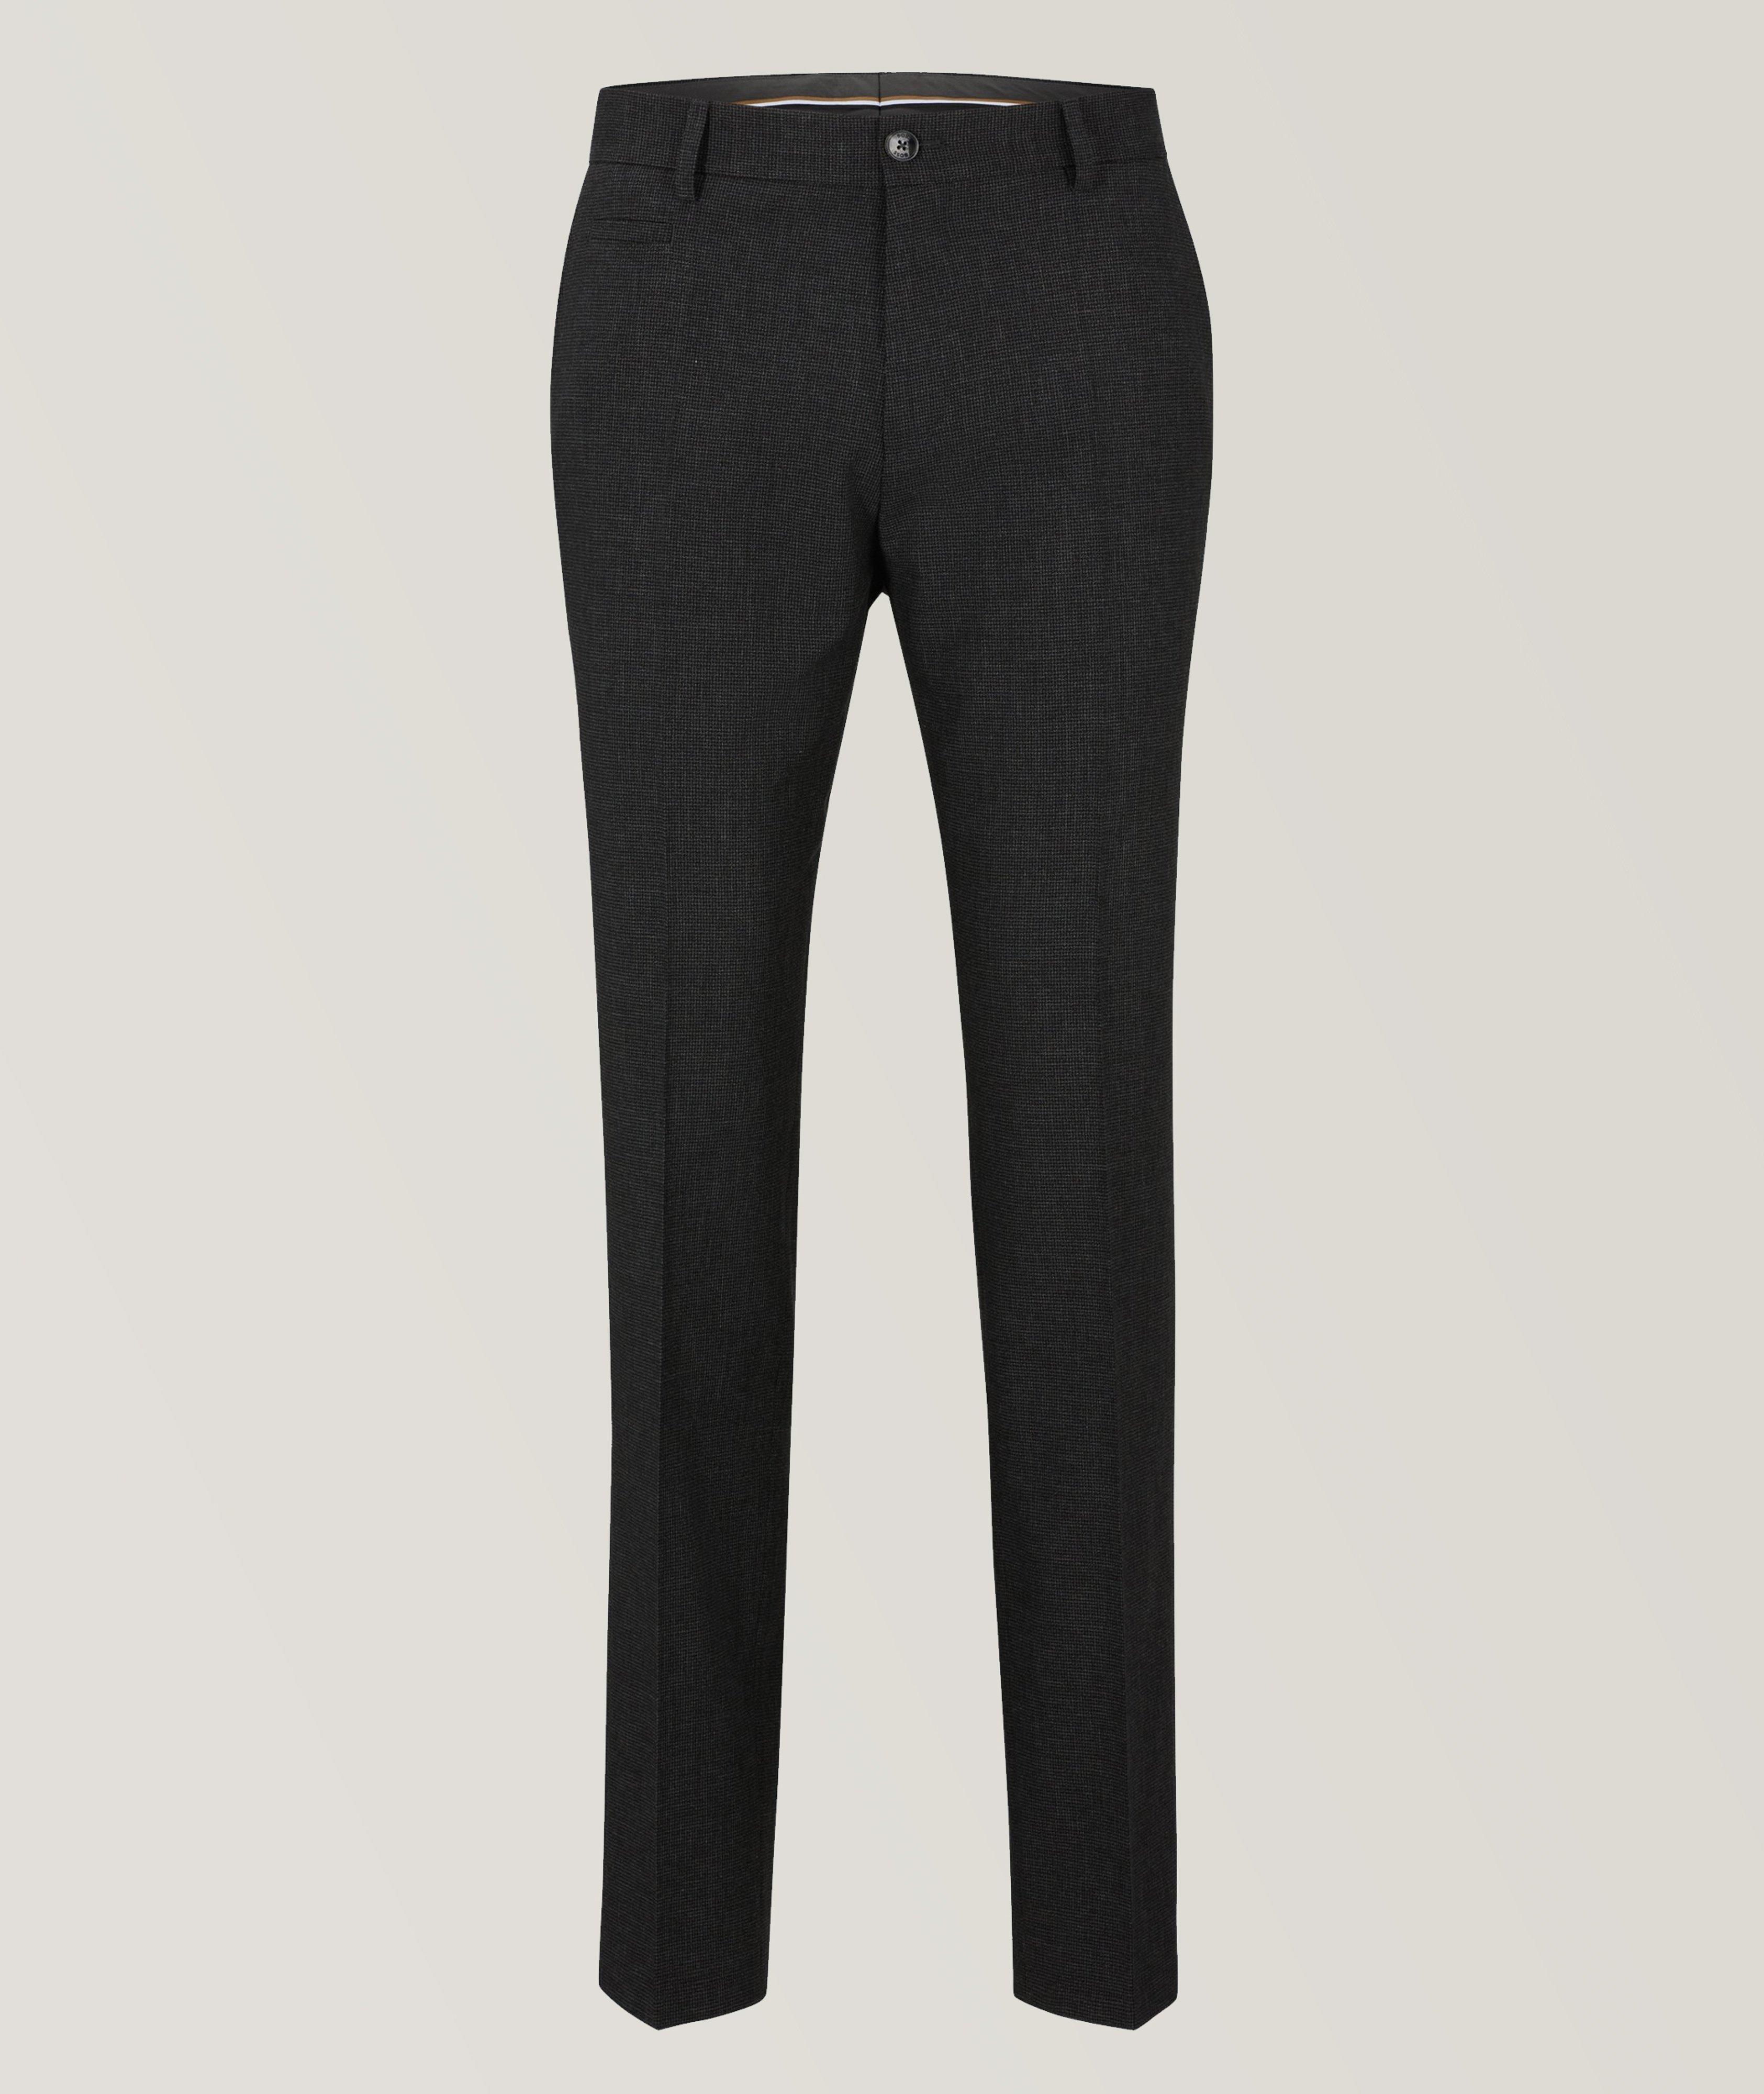 Wool Stretch Blend Slim Fit Tailored Pants